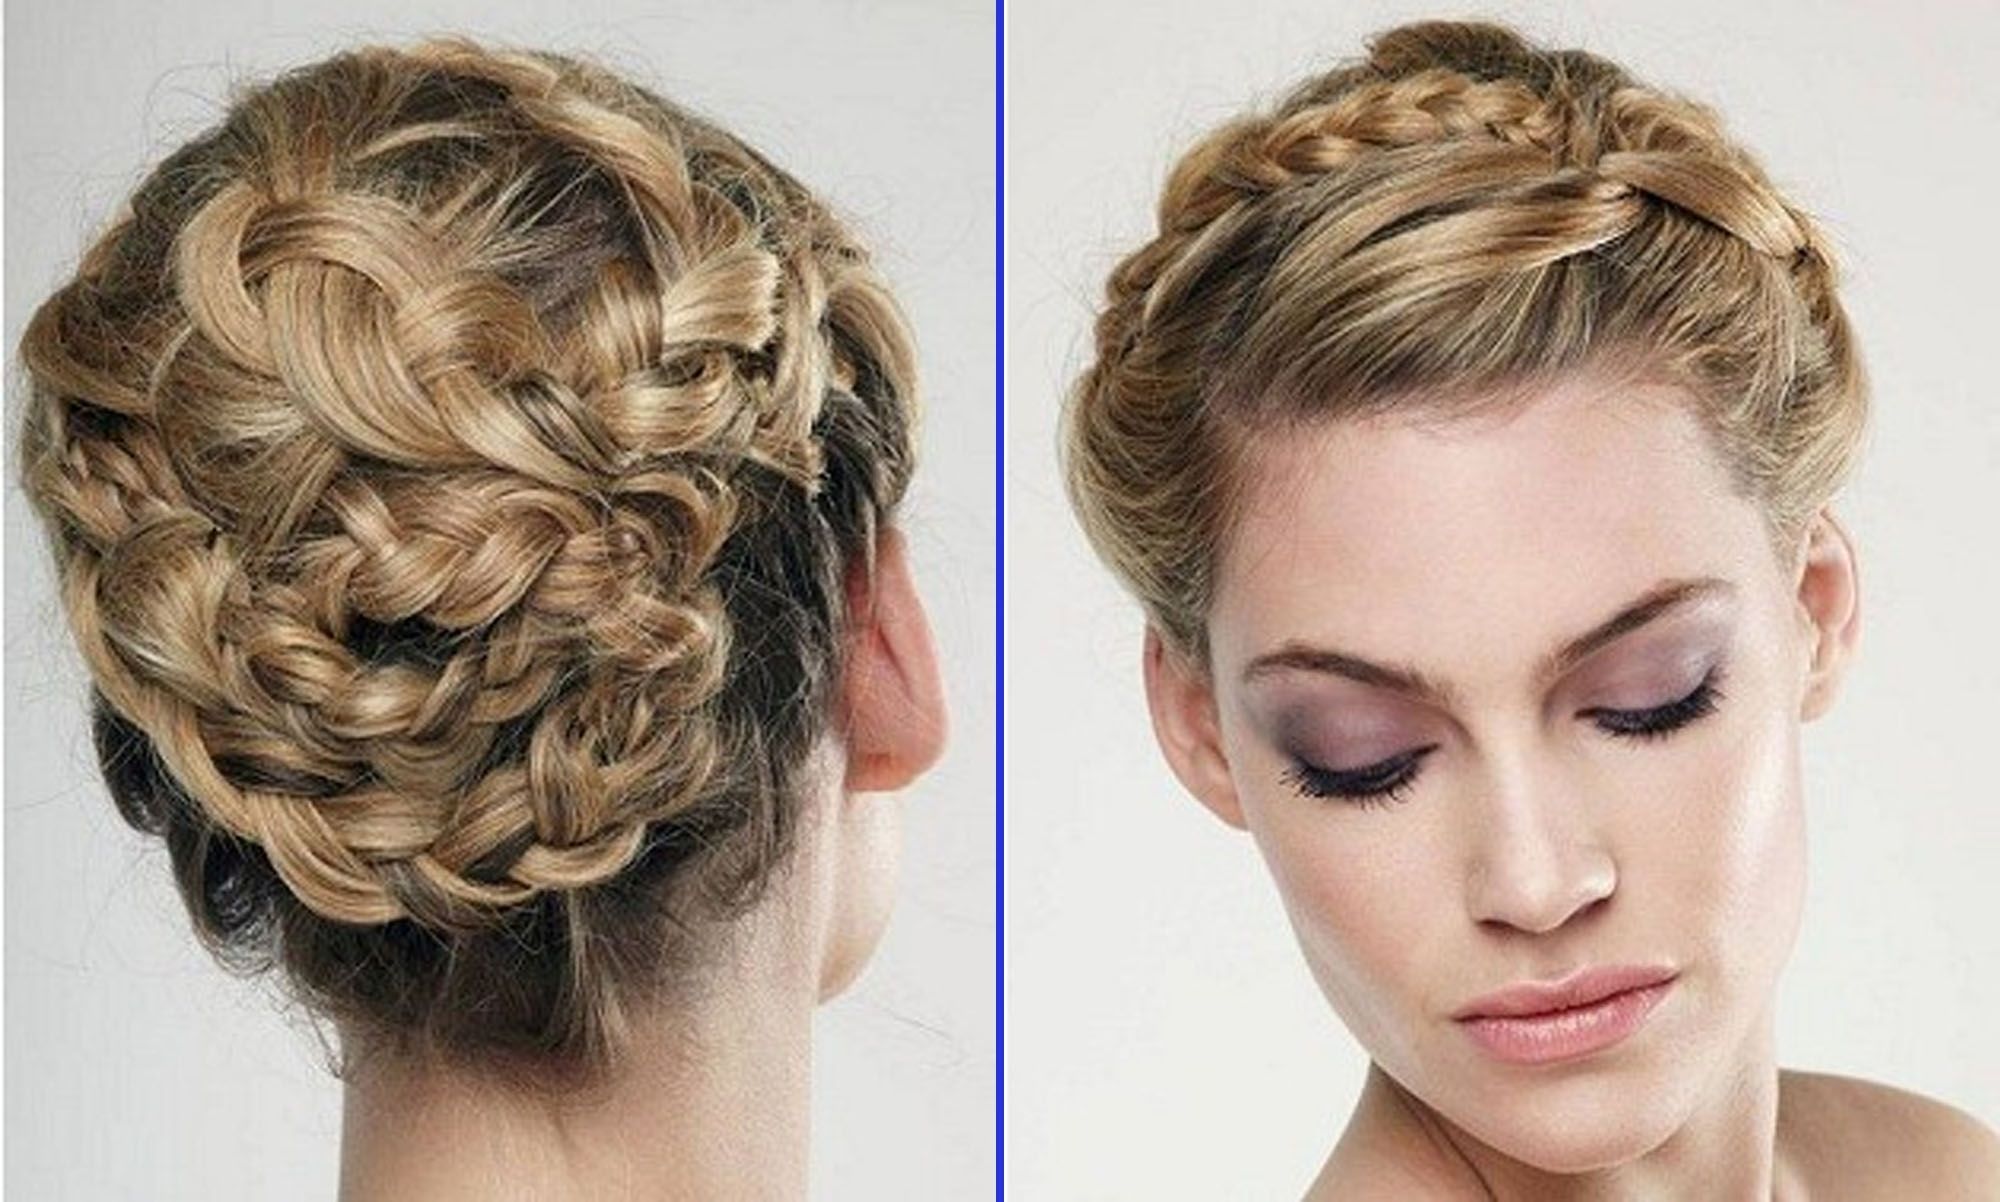 Braided Updo Hairstyles Wedding For Women Hairdresser | Medium Hair For Easy Hair Updo Hairstyles For Wedding (View 8 of 15)